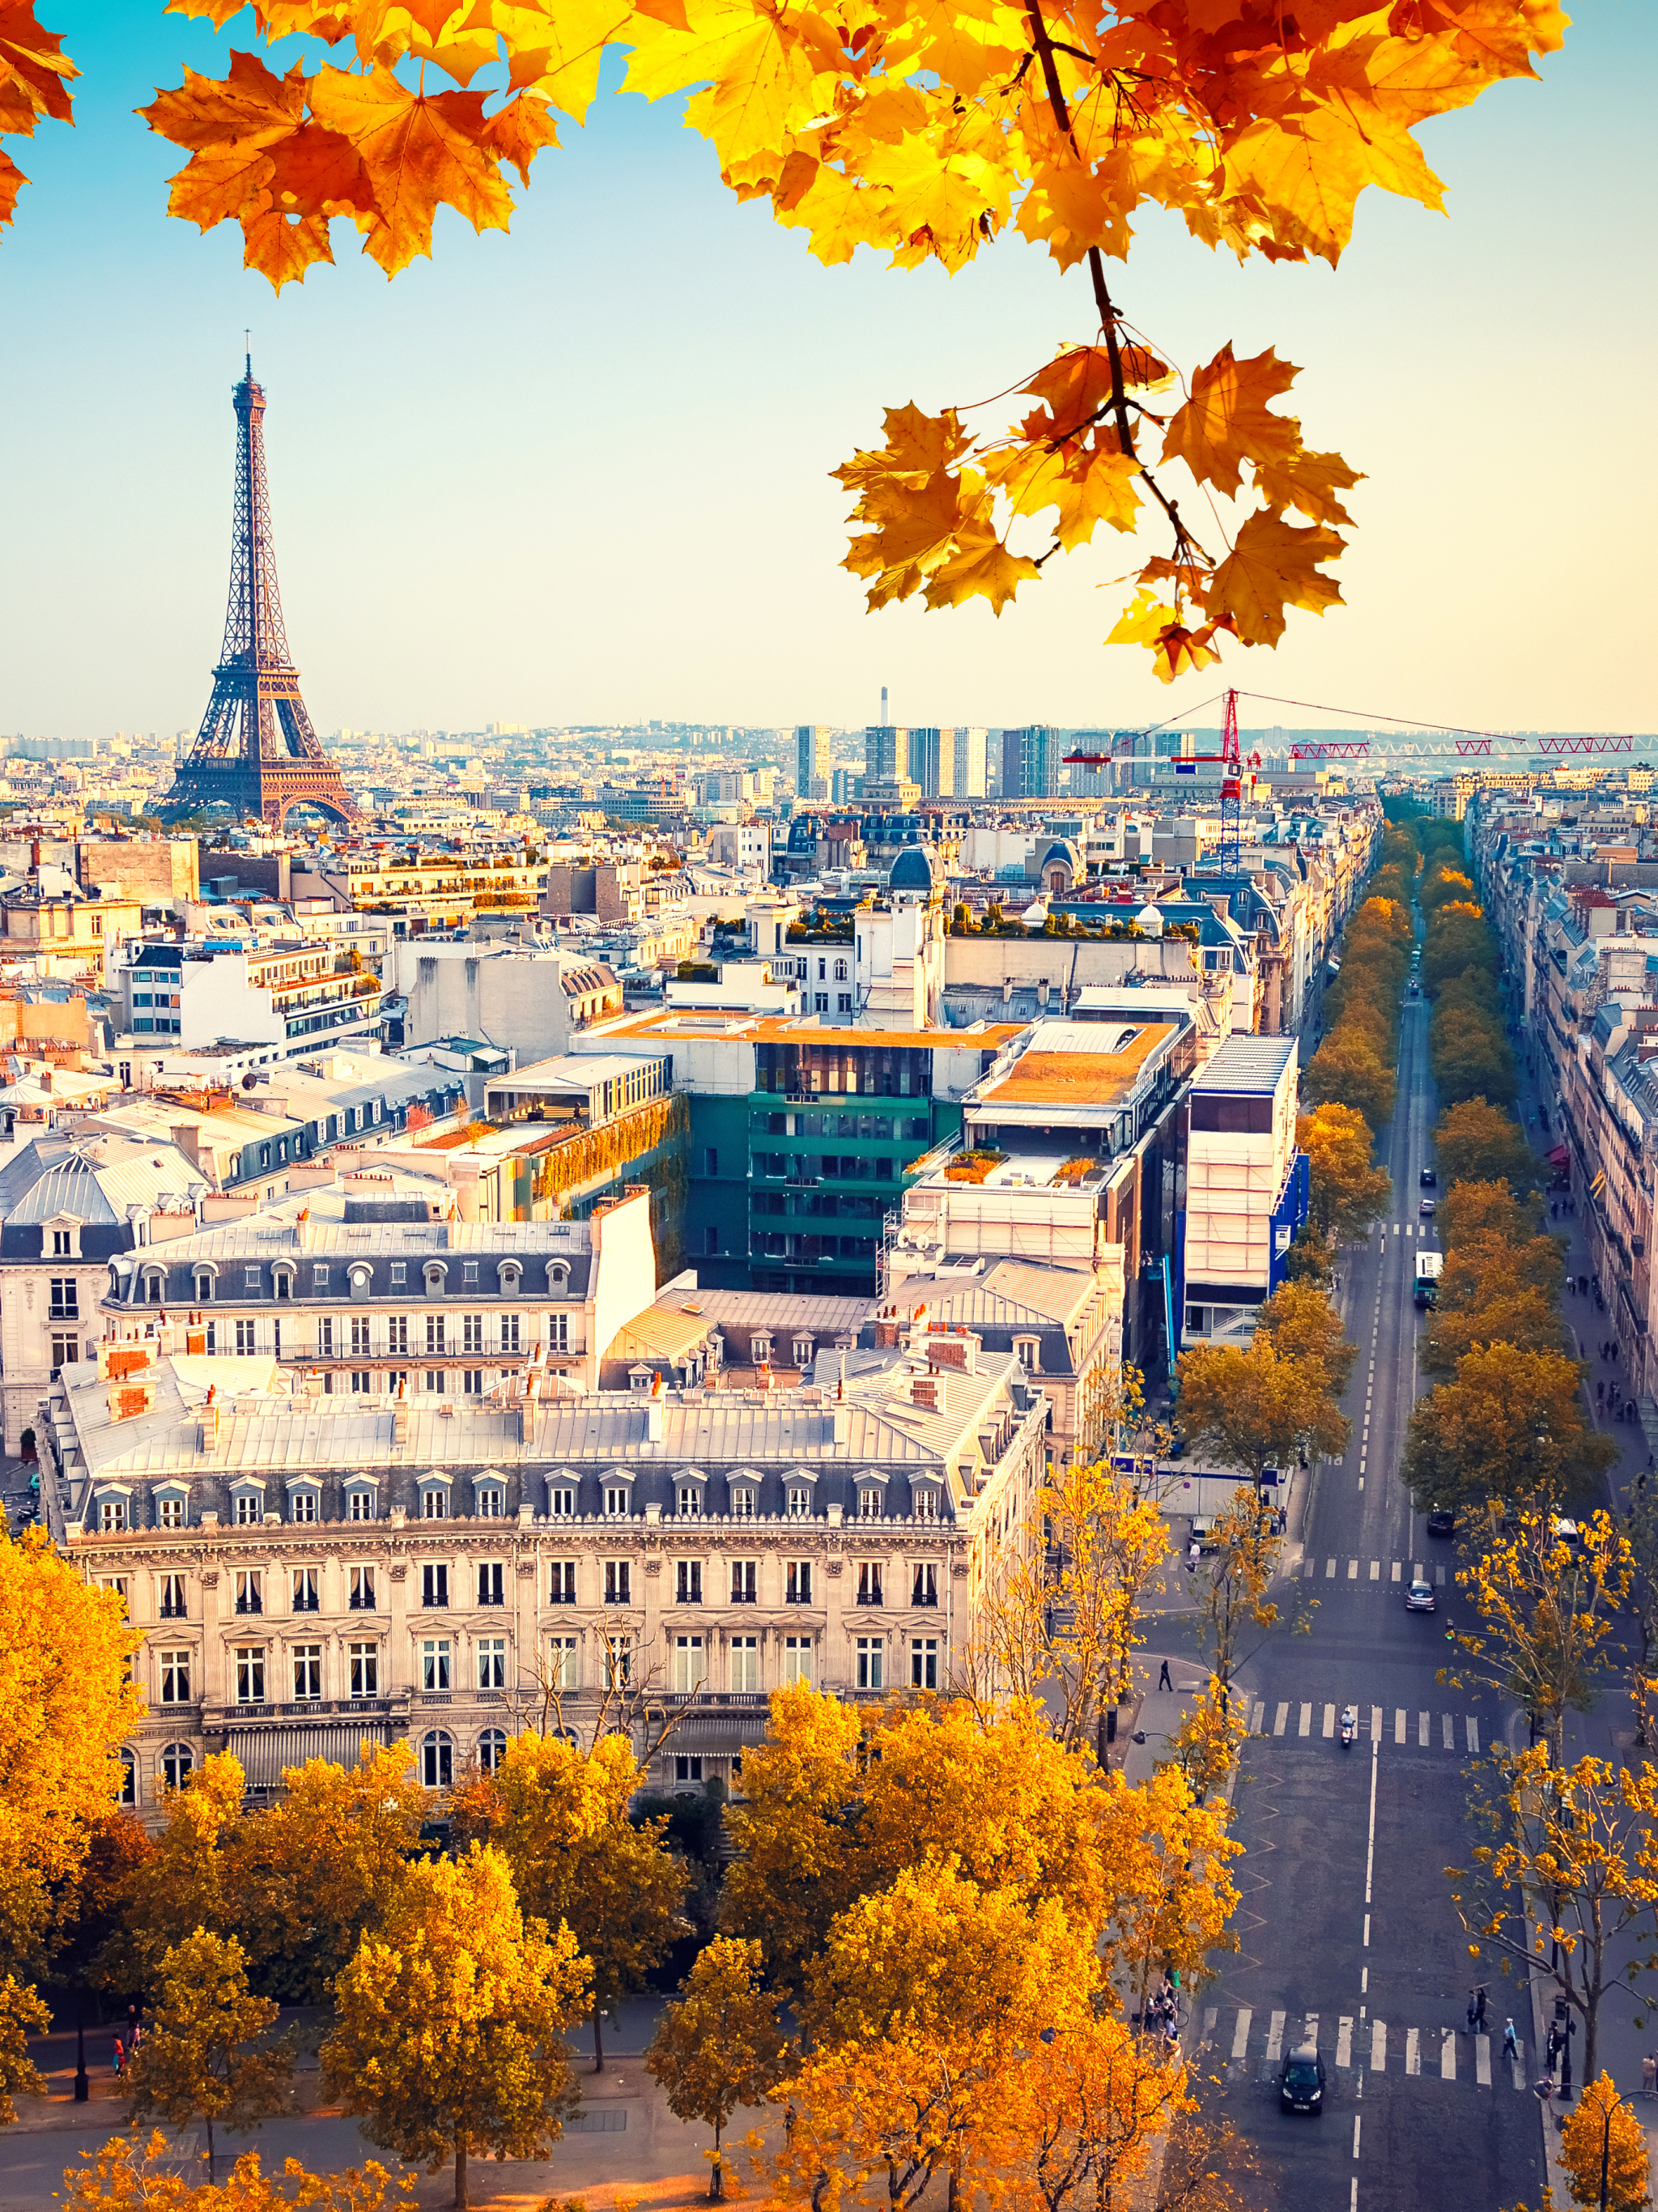 Download mobile wallpaper Cities, Paris, Eiffel Tower, City, Building, Fall, France, Cityscape, Man Made for free.